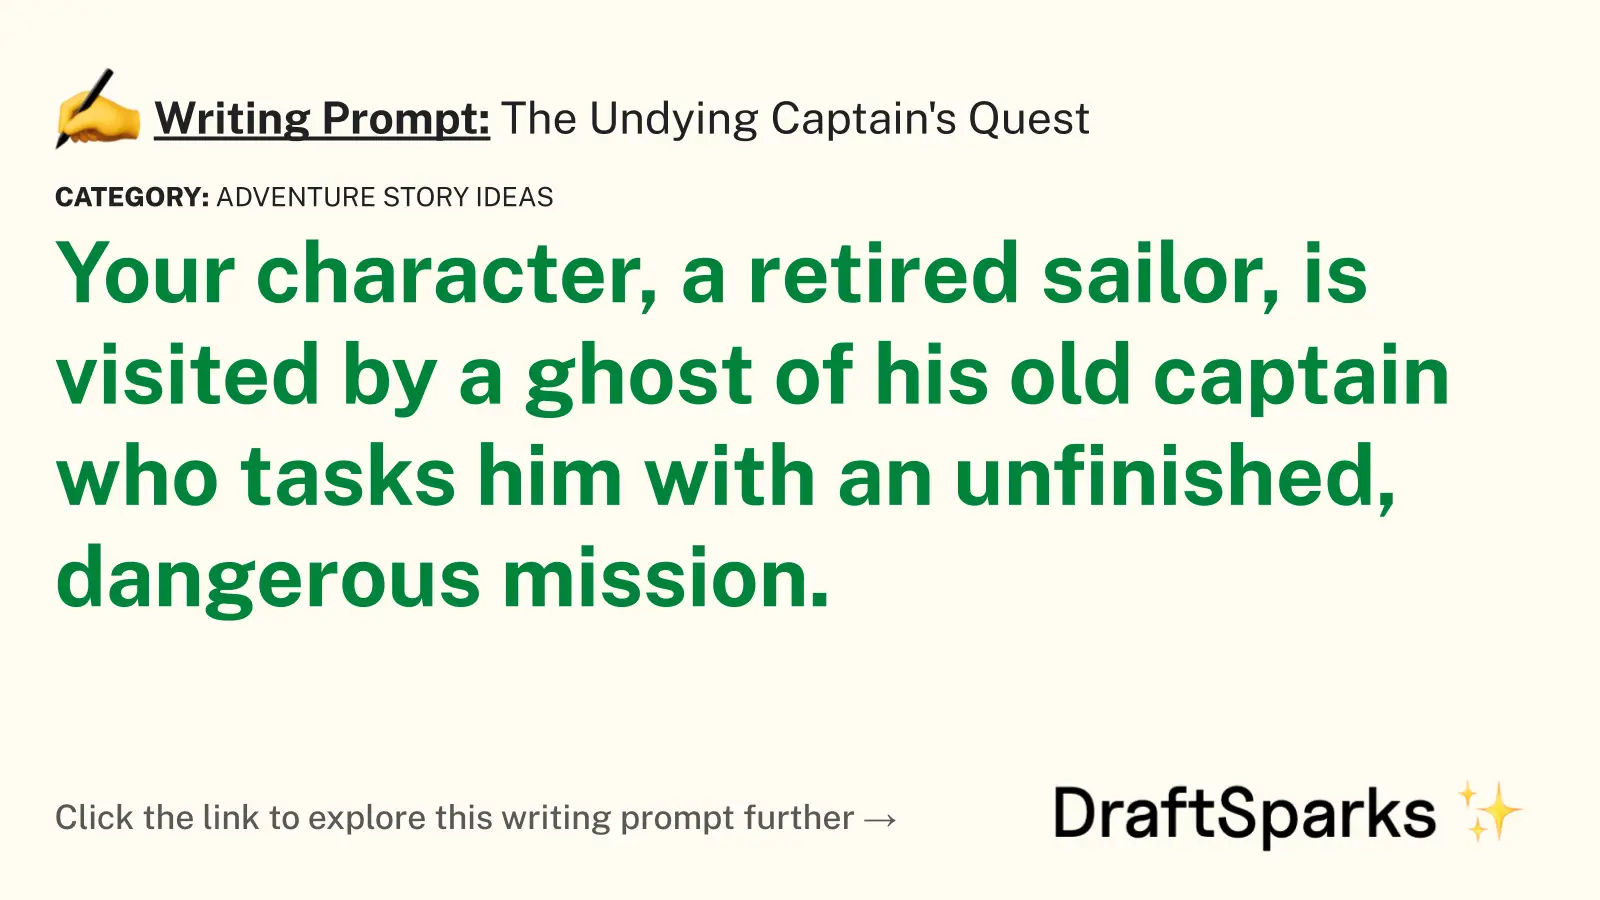 The Undying Captain’s Quest